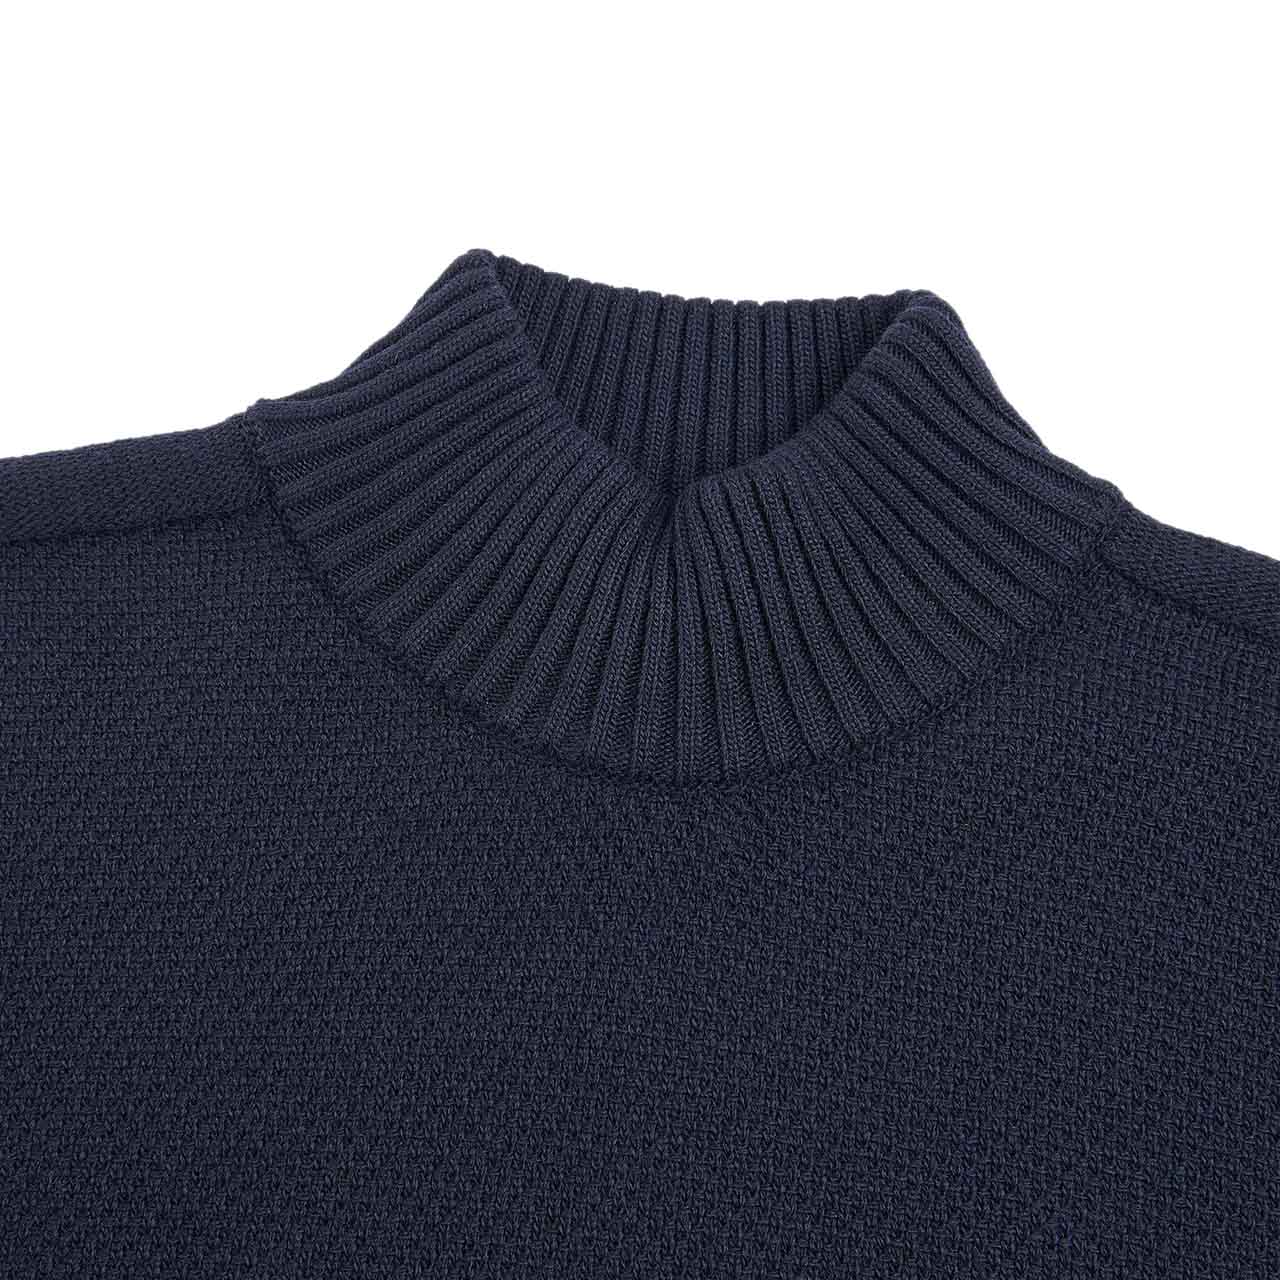 stone island knitted pullover (navy blue)